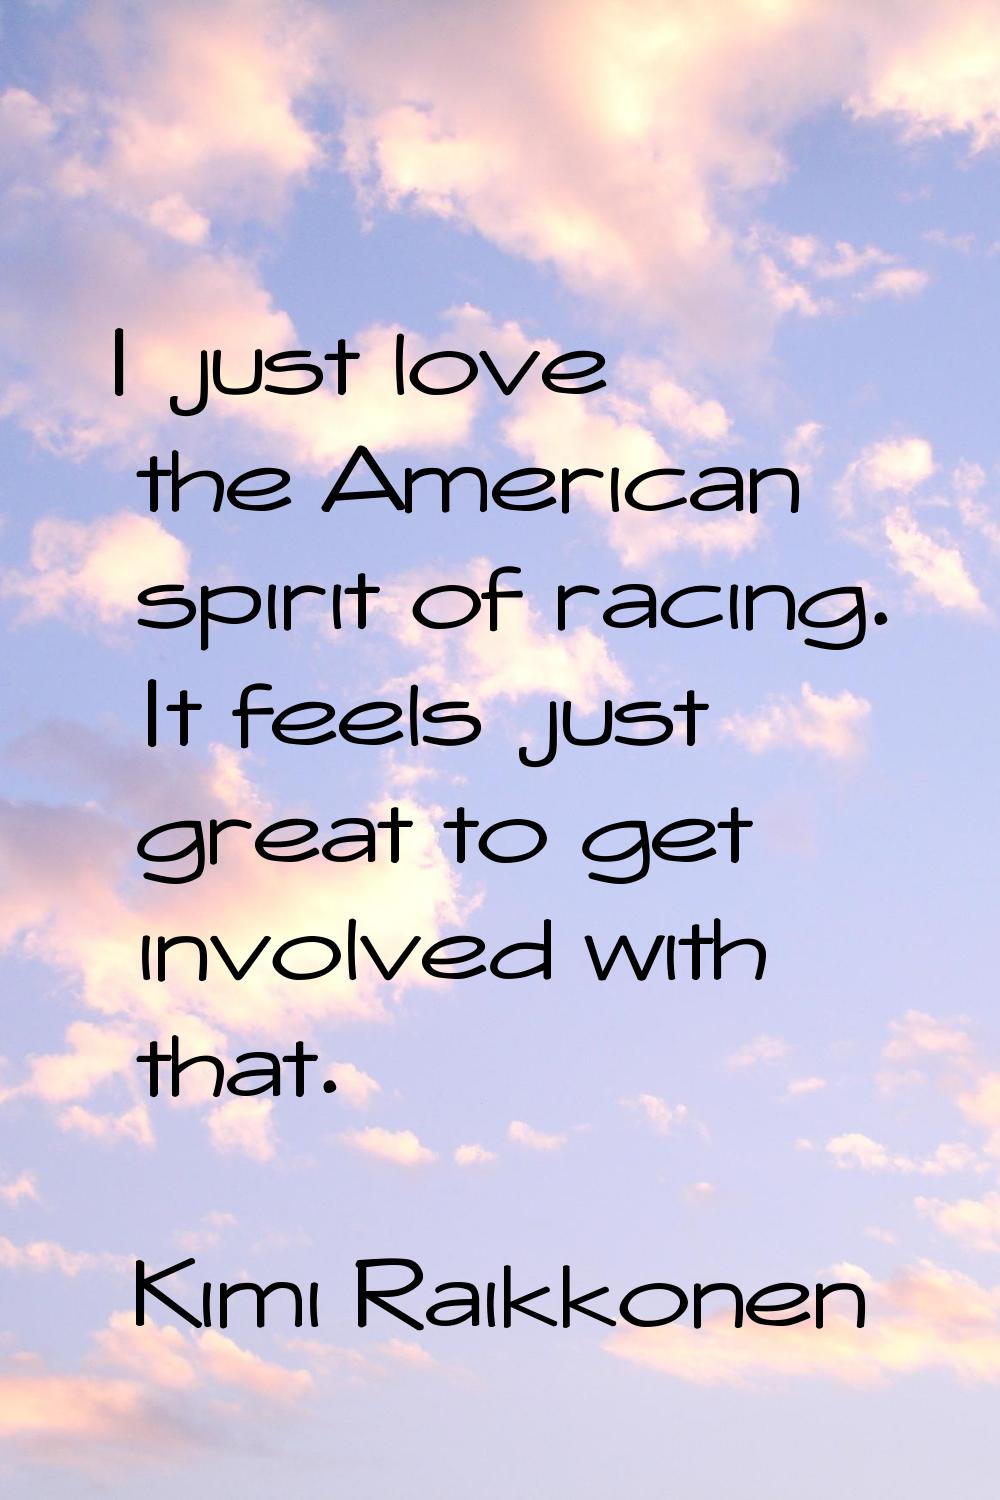 I just love the American spirit of racing. It feels just great to get involved with that.